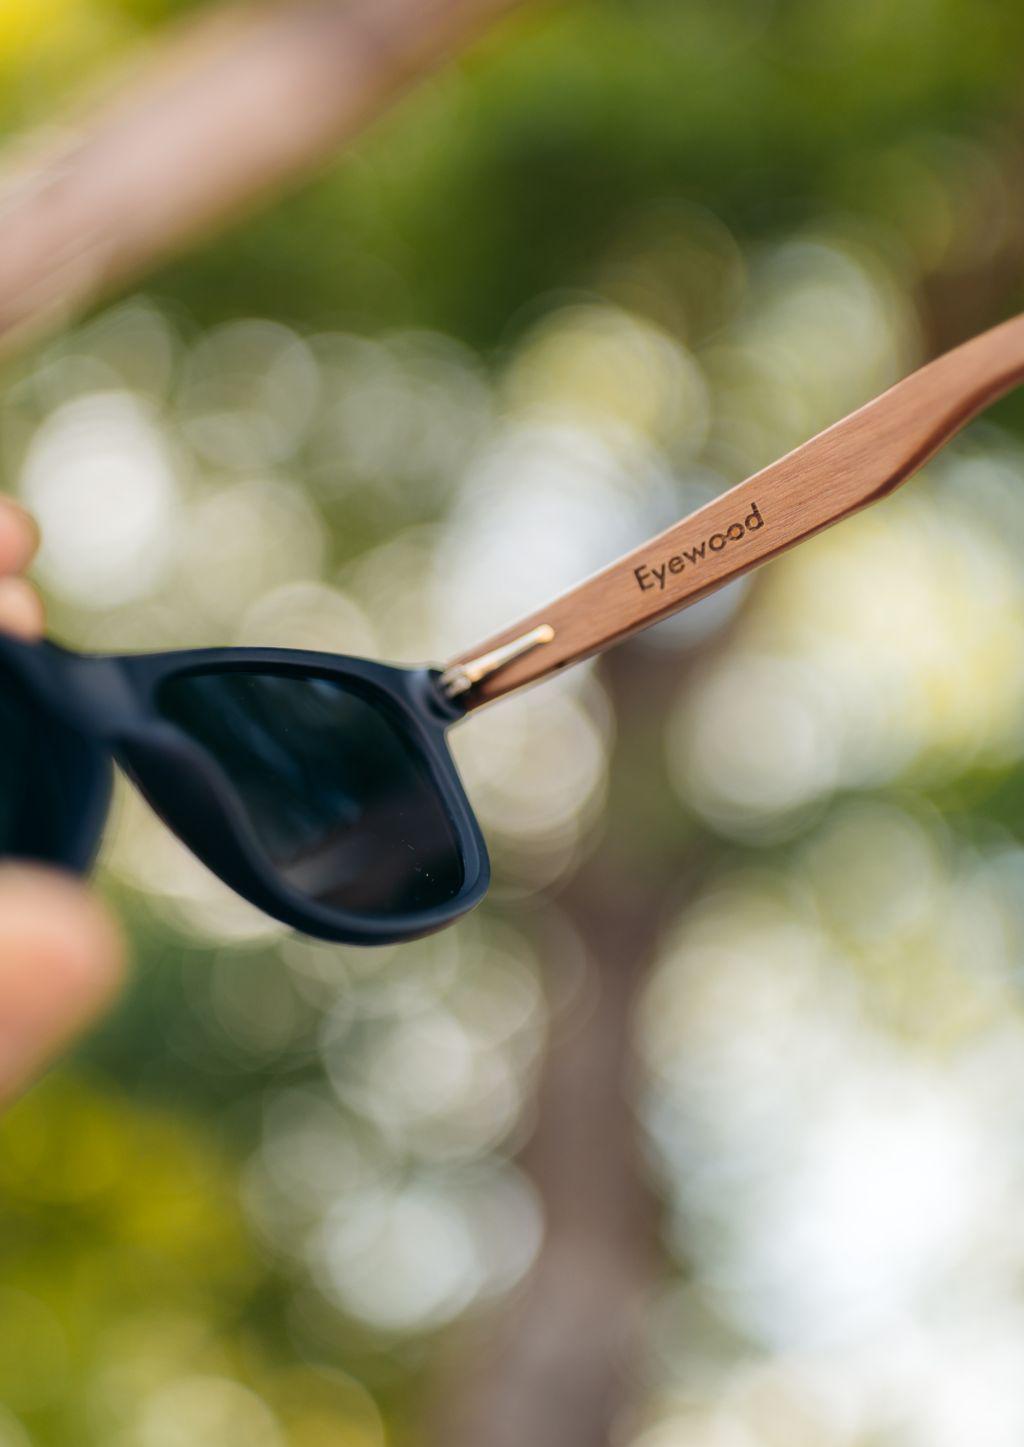 Native Wooden engraved sunglasses details on the inside.